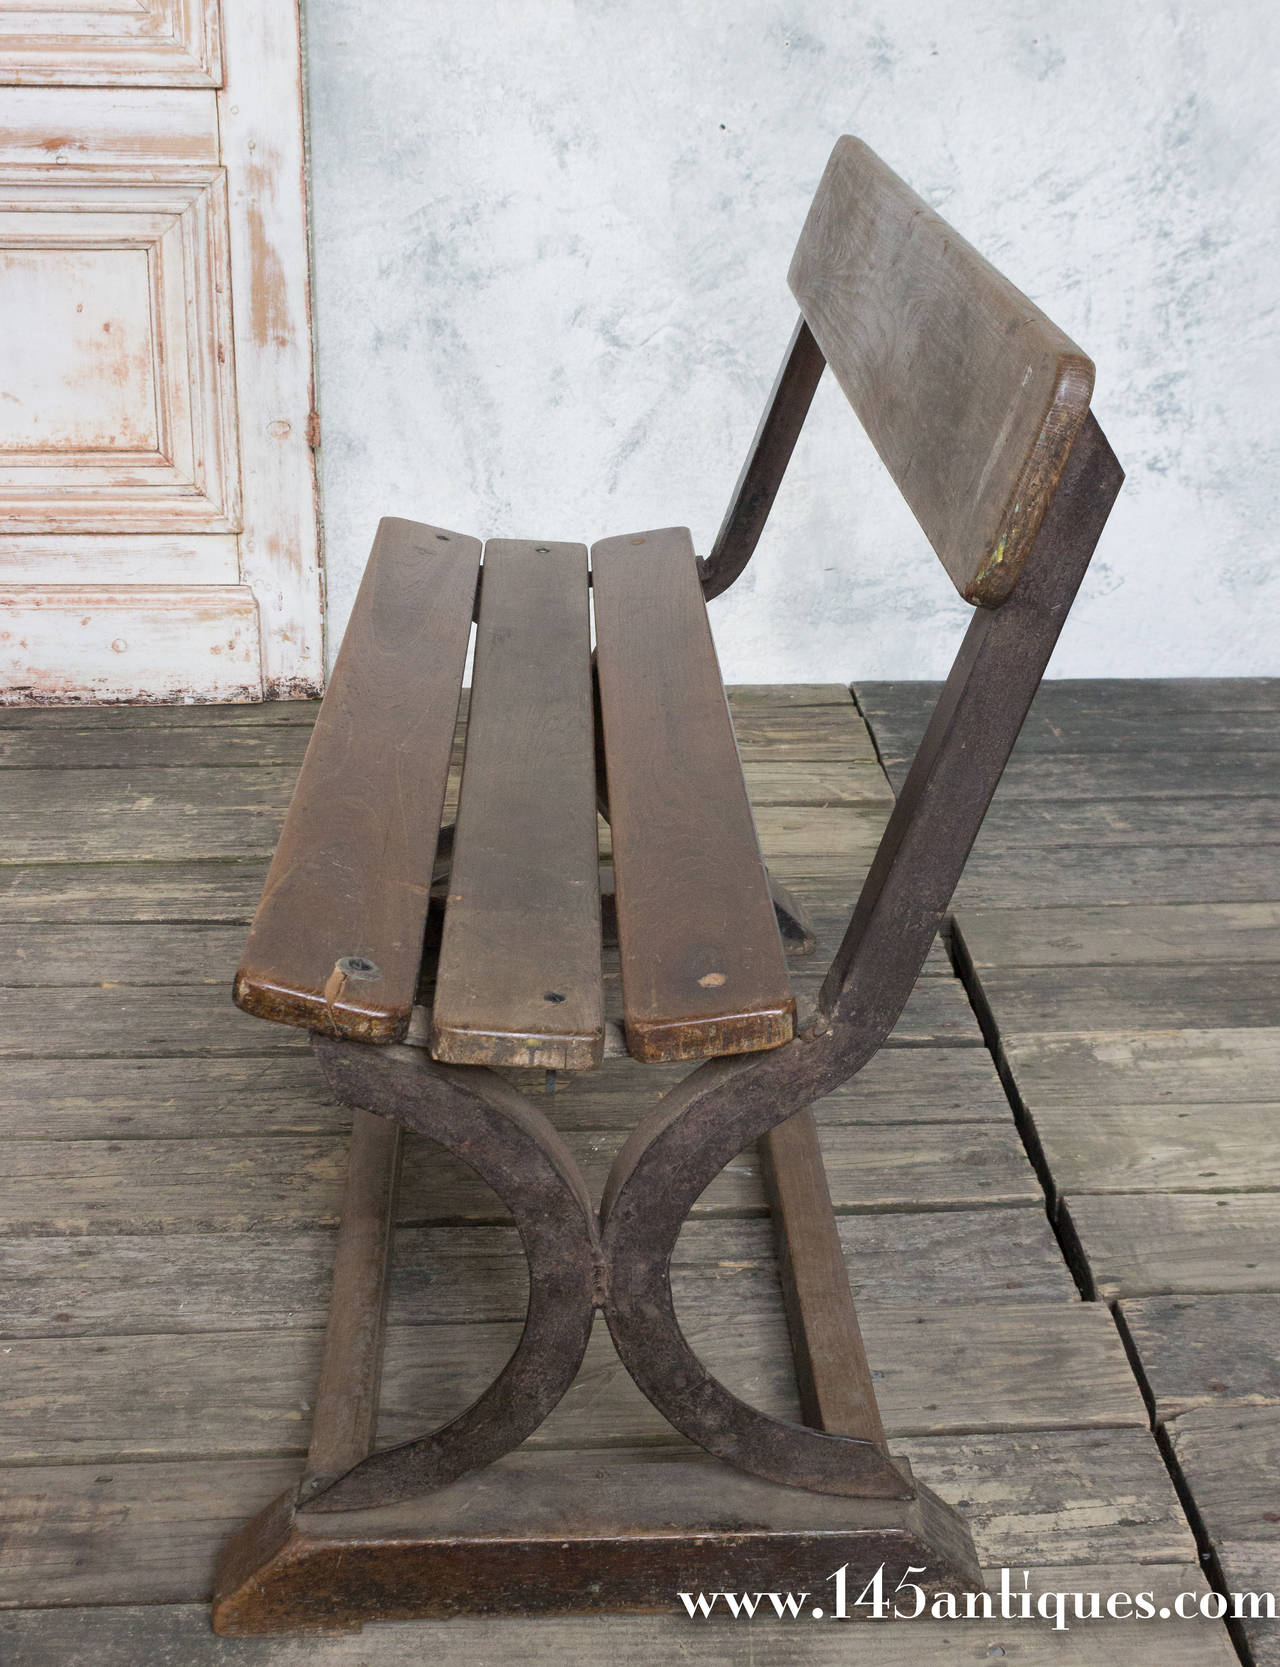 Small park bench with wood plank seat and back on an iron frame base, France, circa 1900.